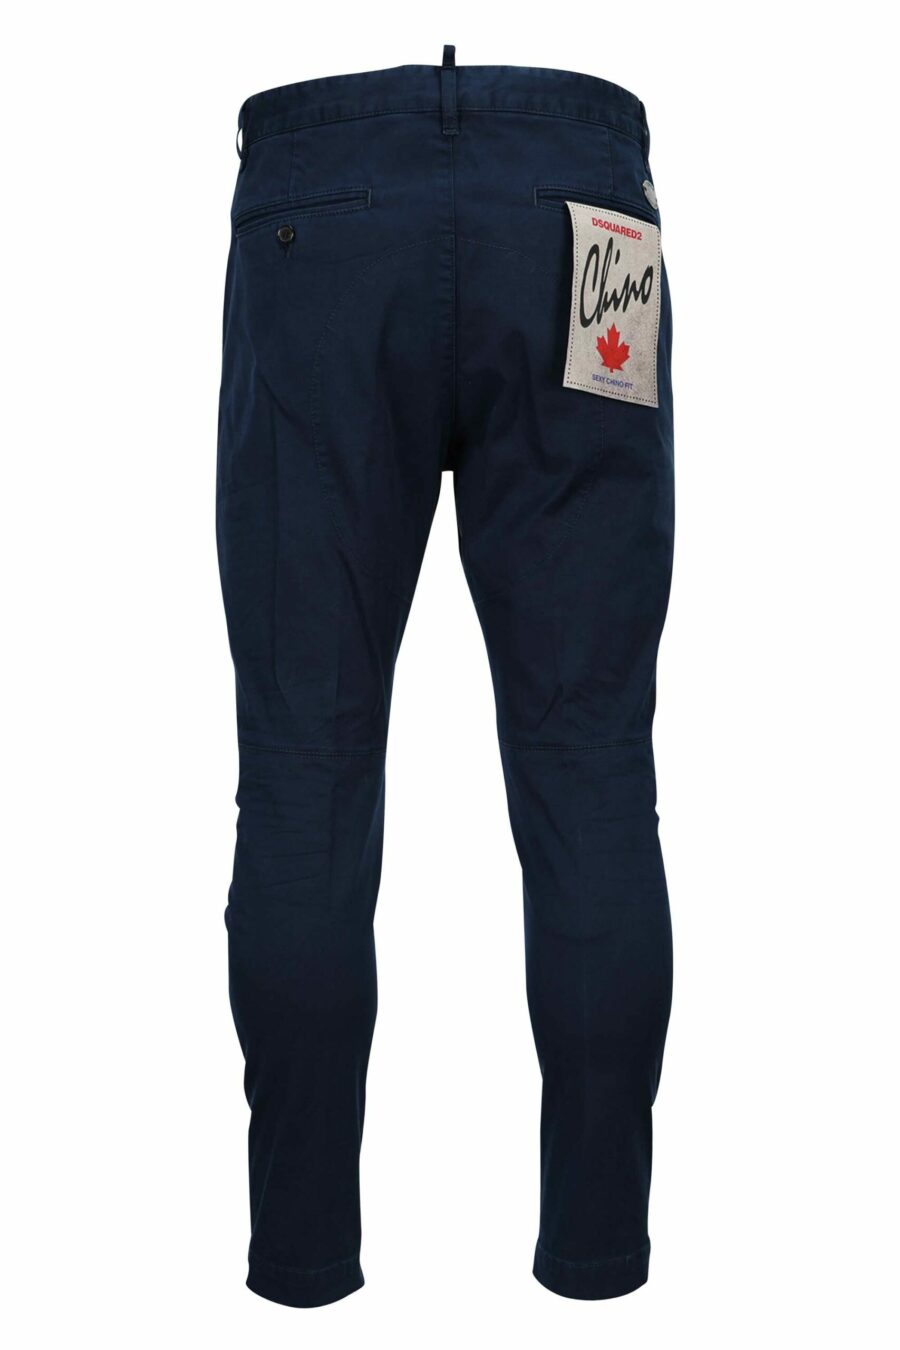 Sexy chino trousers dark blue - 8052134973431 2 scaled